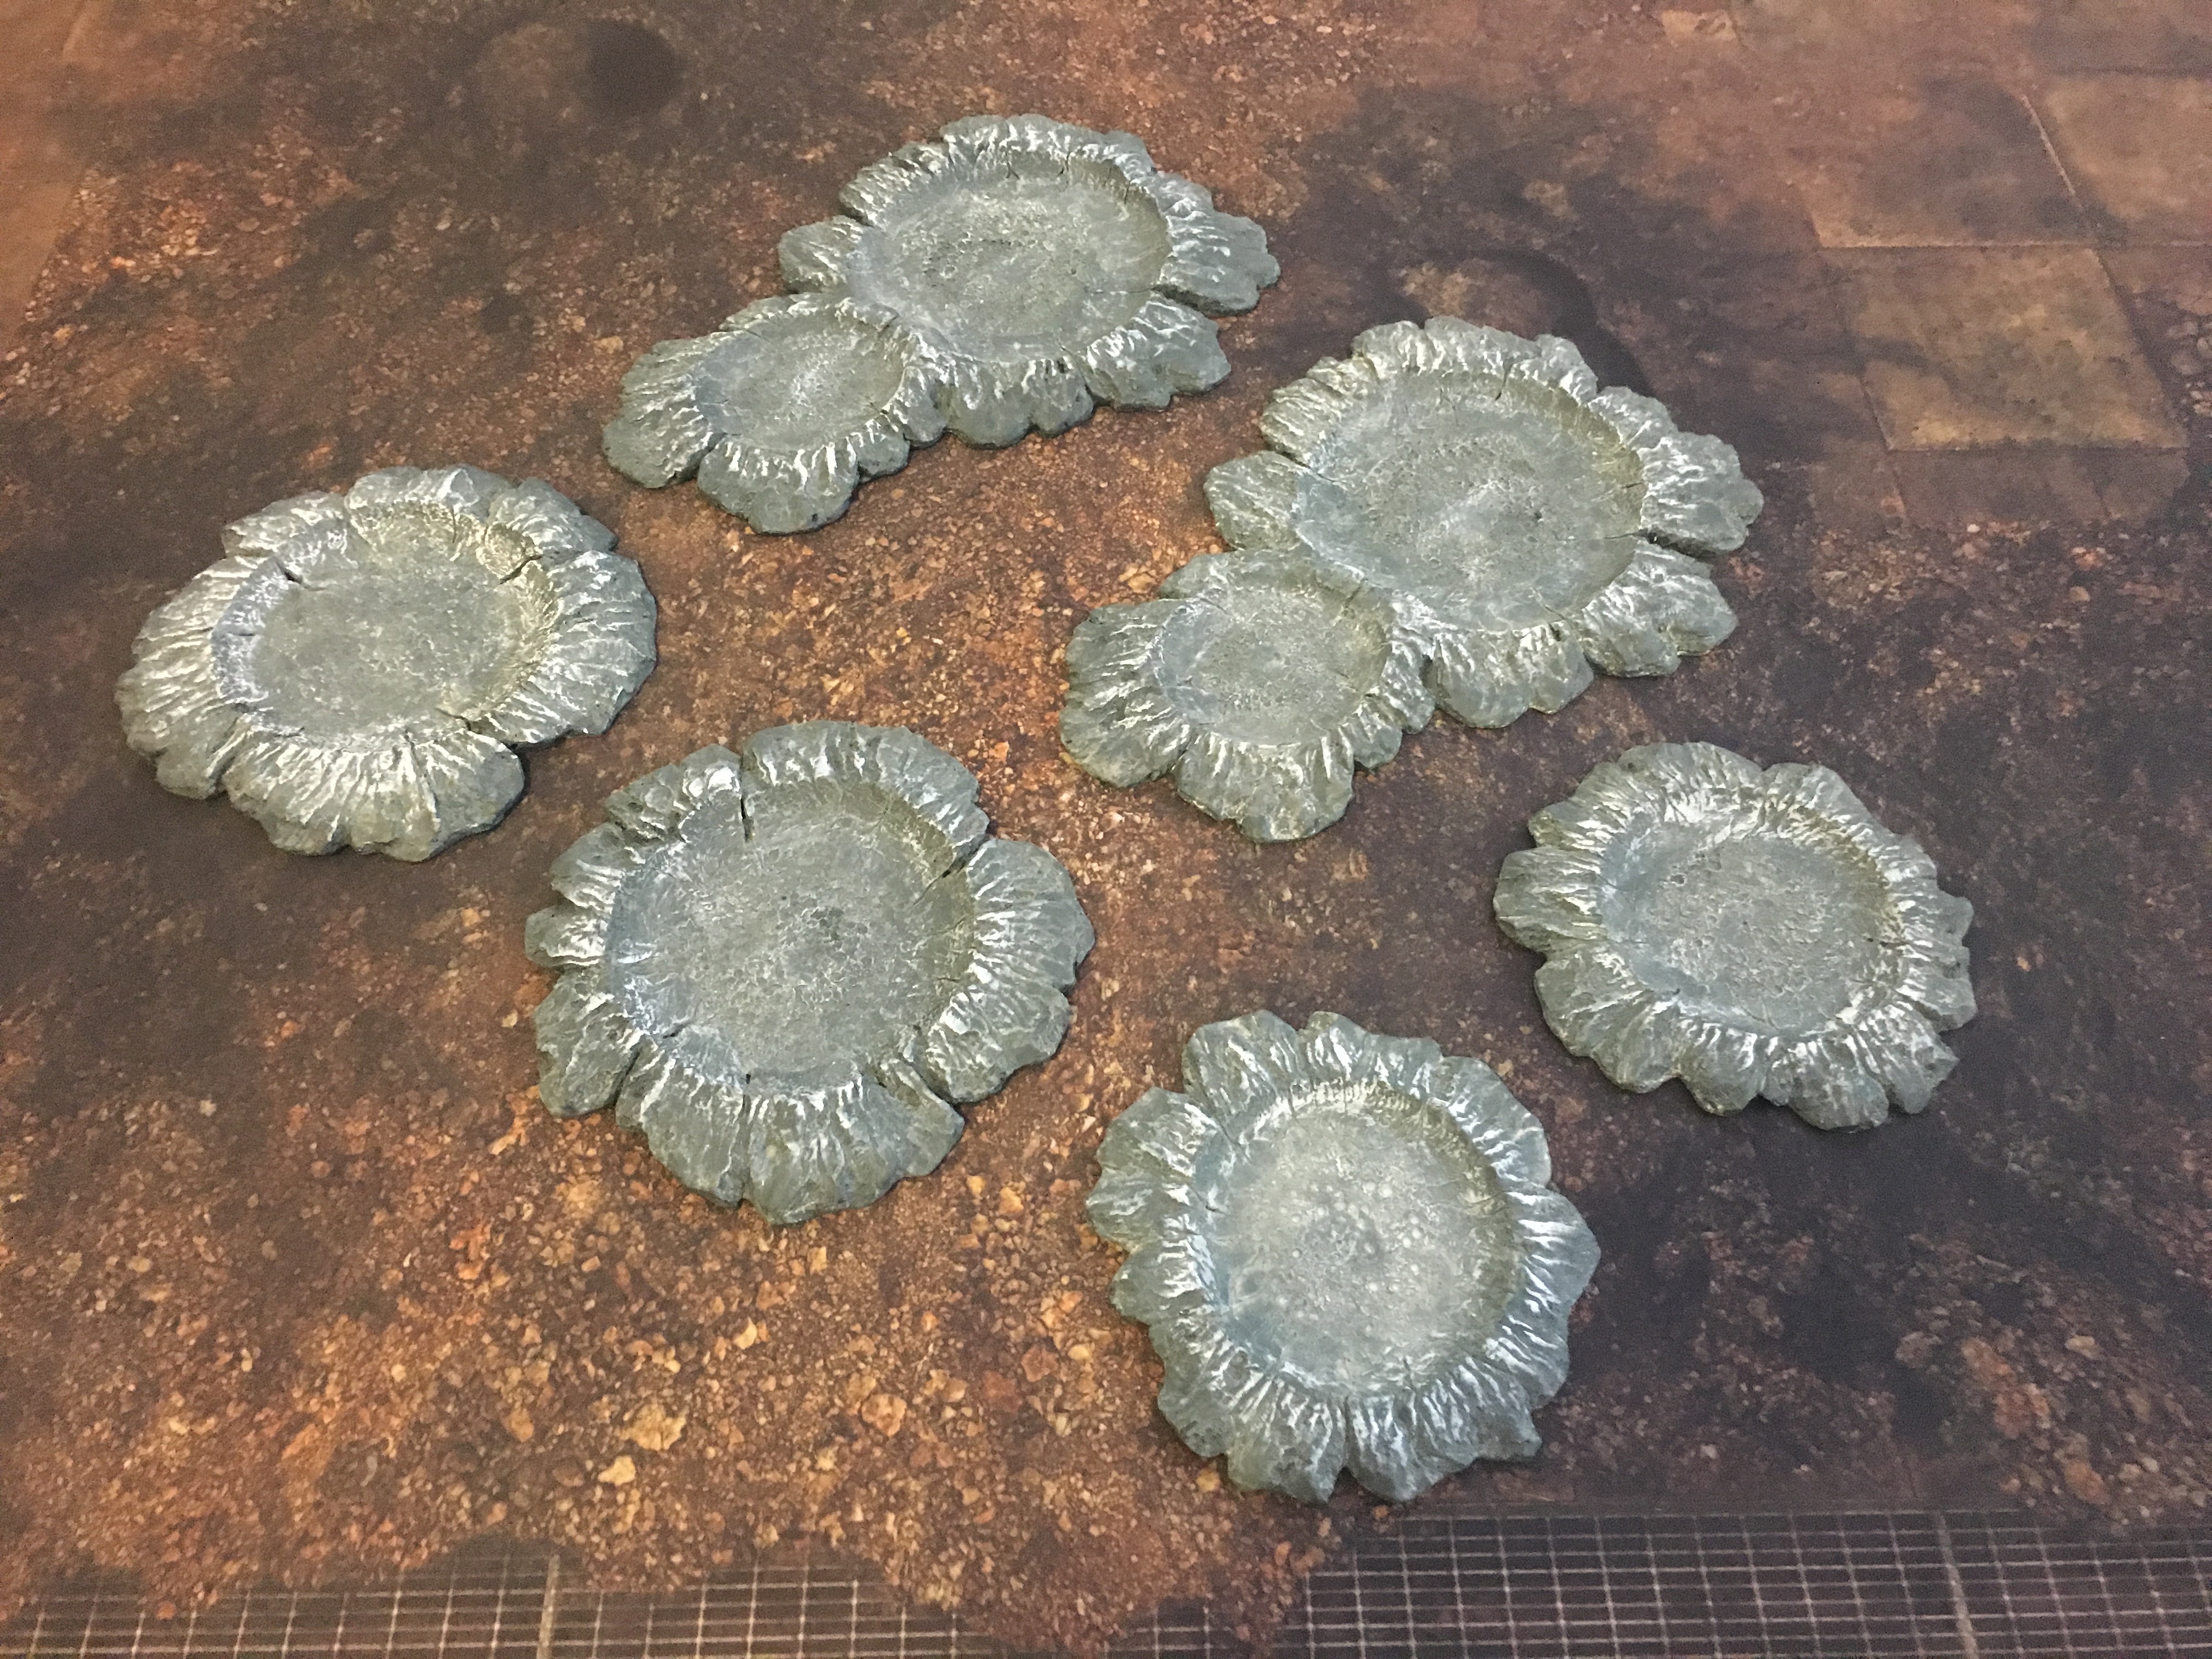 PREPAINTED WARGAMING CRATERS – 2 COLOUR VERSIONS – GREY and DESERT – 6pcs sets